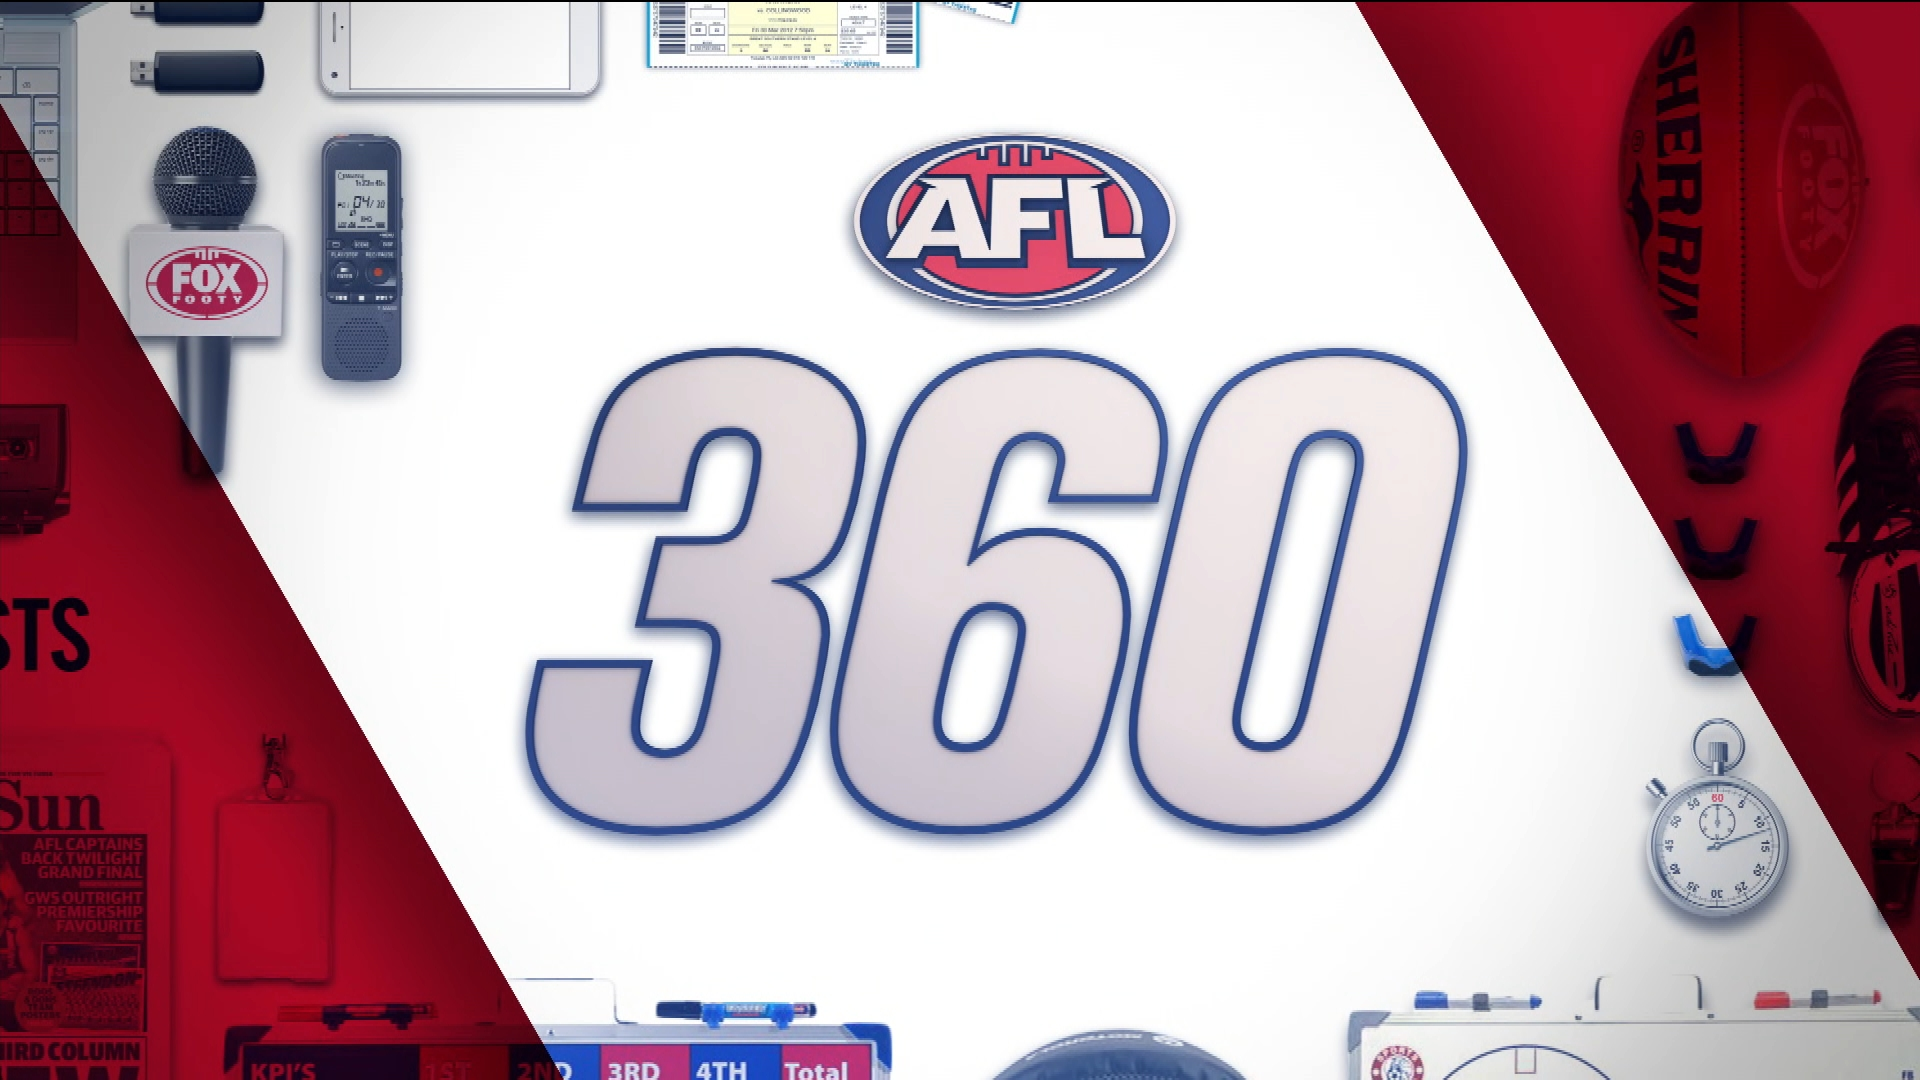 AFL 360 - "I'm gettin' wound up here!": Hilarious Riewoldt reminisces on Hardwick - 23/05/23